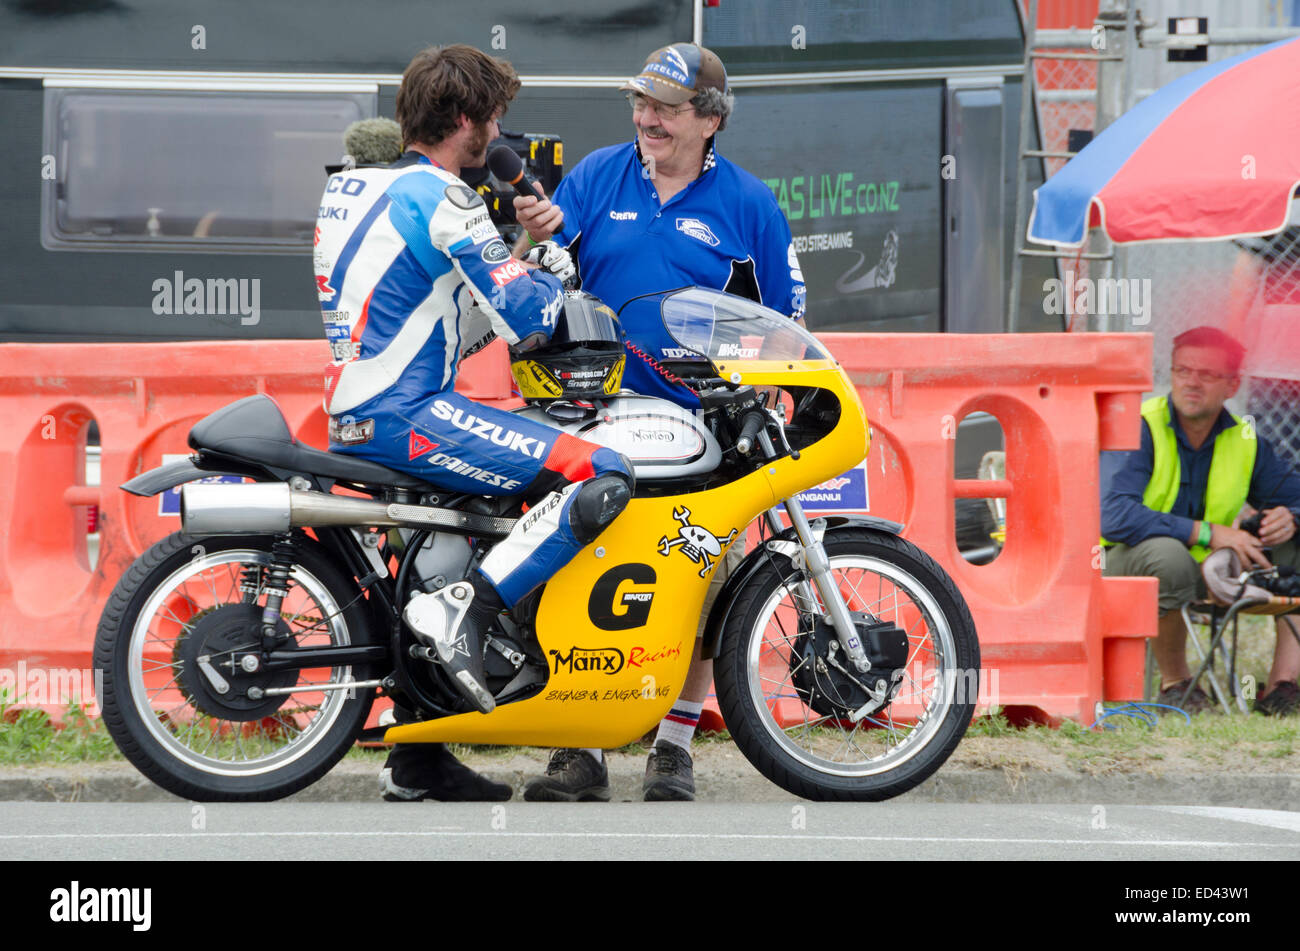 Wanganui, New Zealand. 26th Dec, 2014. Guy Martin, UK TV presenter and motorcycle racer, being interviewed for NZ TV after winning the classic solo race at the annual Boxing Day “Cemetery Circuit” event in Wanganui, New Zealand on 26 December 2014 on his vintage Manx Norton bike.  The race is part of the Suzuki Series of motorcycle racing held every summer in New Zealand.  It is an exciting day of street racing on a tight one-mile street circuit around the old town cemetery in downtown Wanganui. Credit:  Geoff  Marshall/Alamy Live News Stock Photo